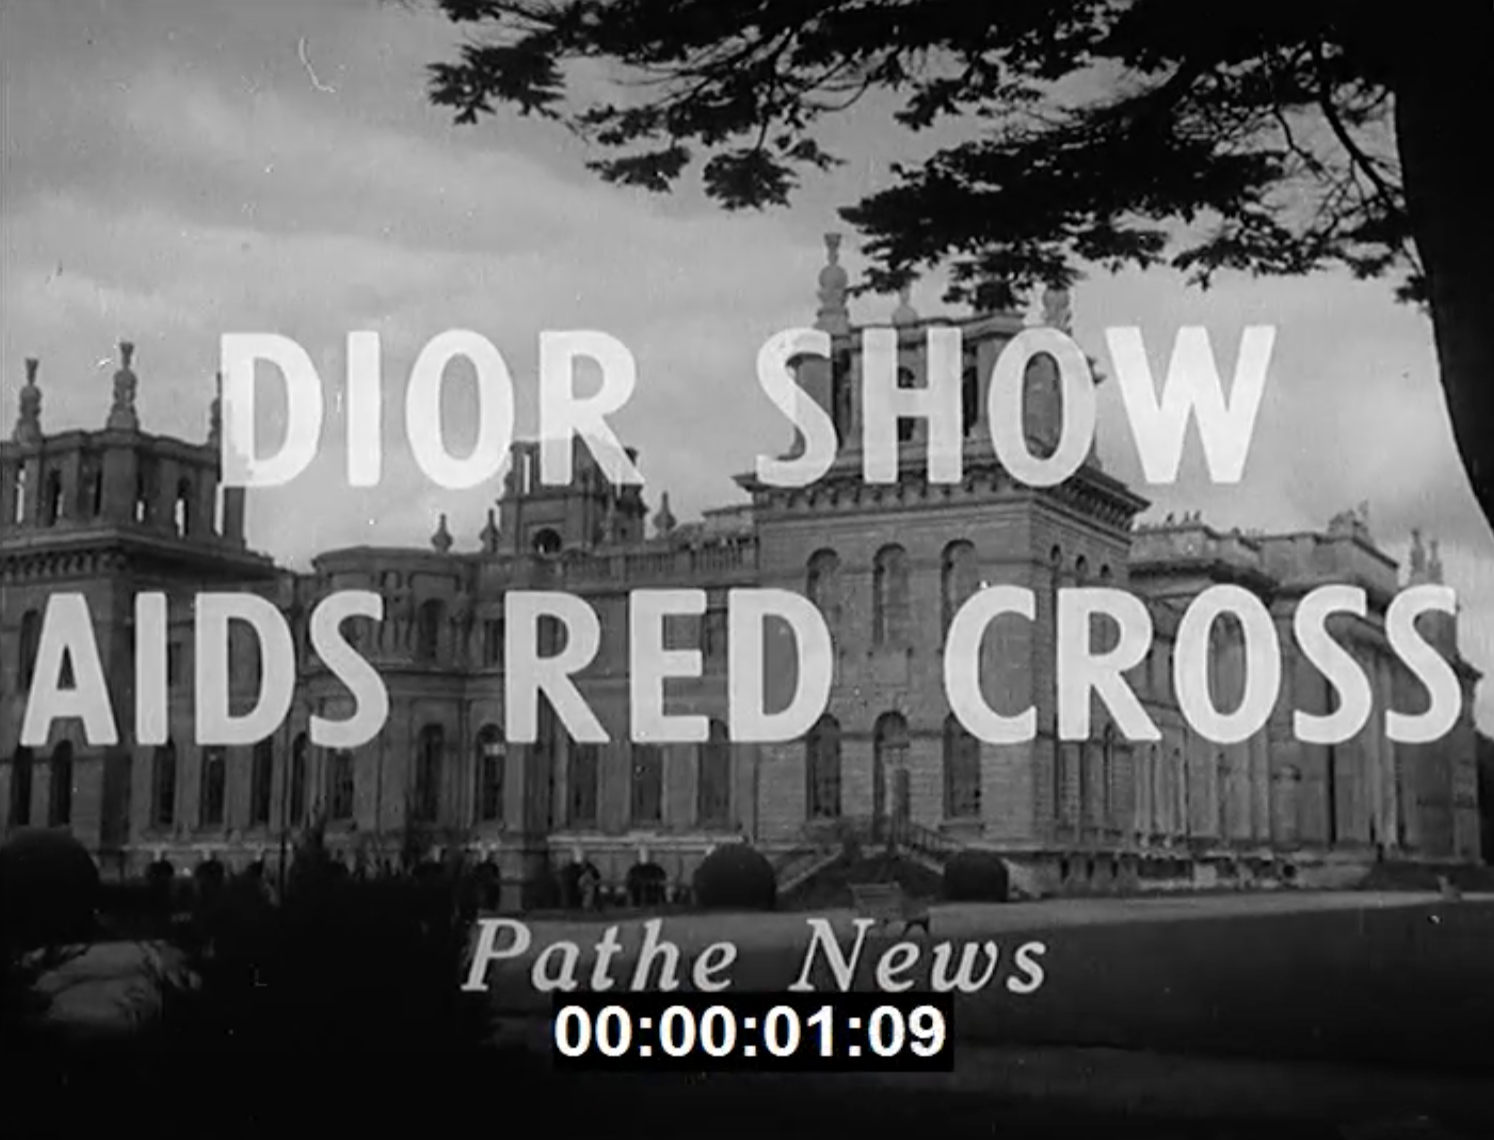 1954 Dior show aids red cross placeholder